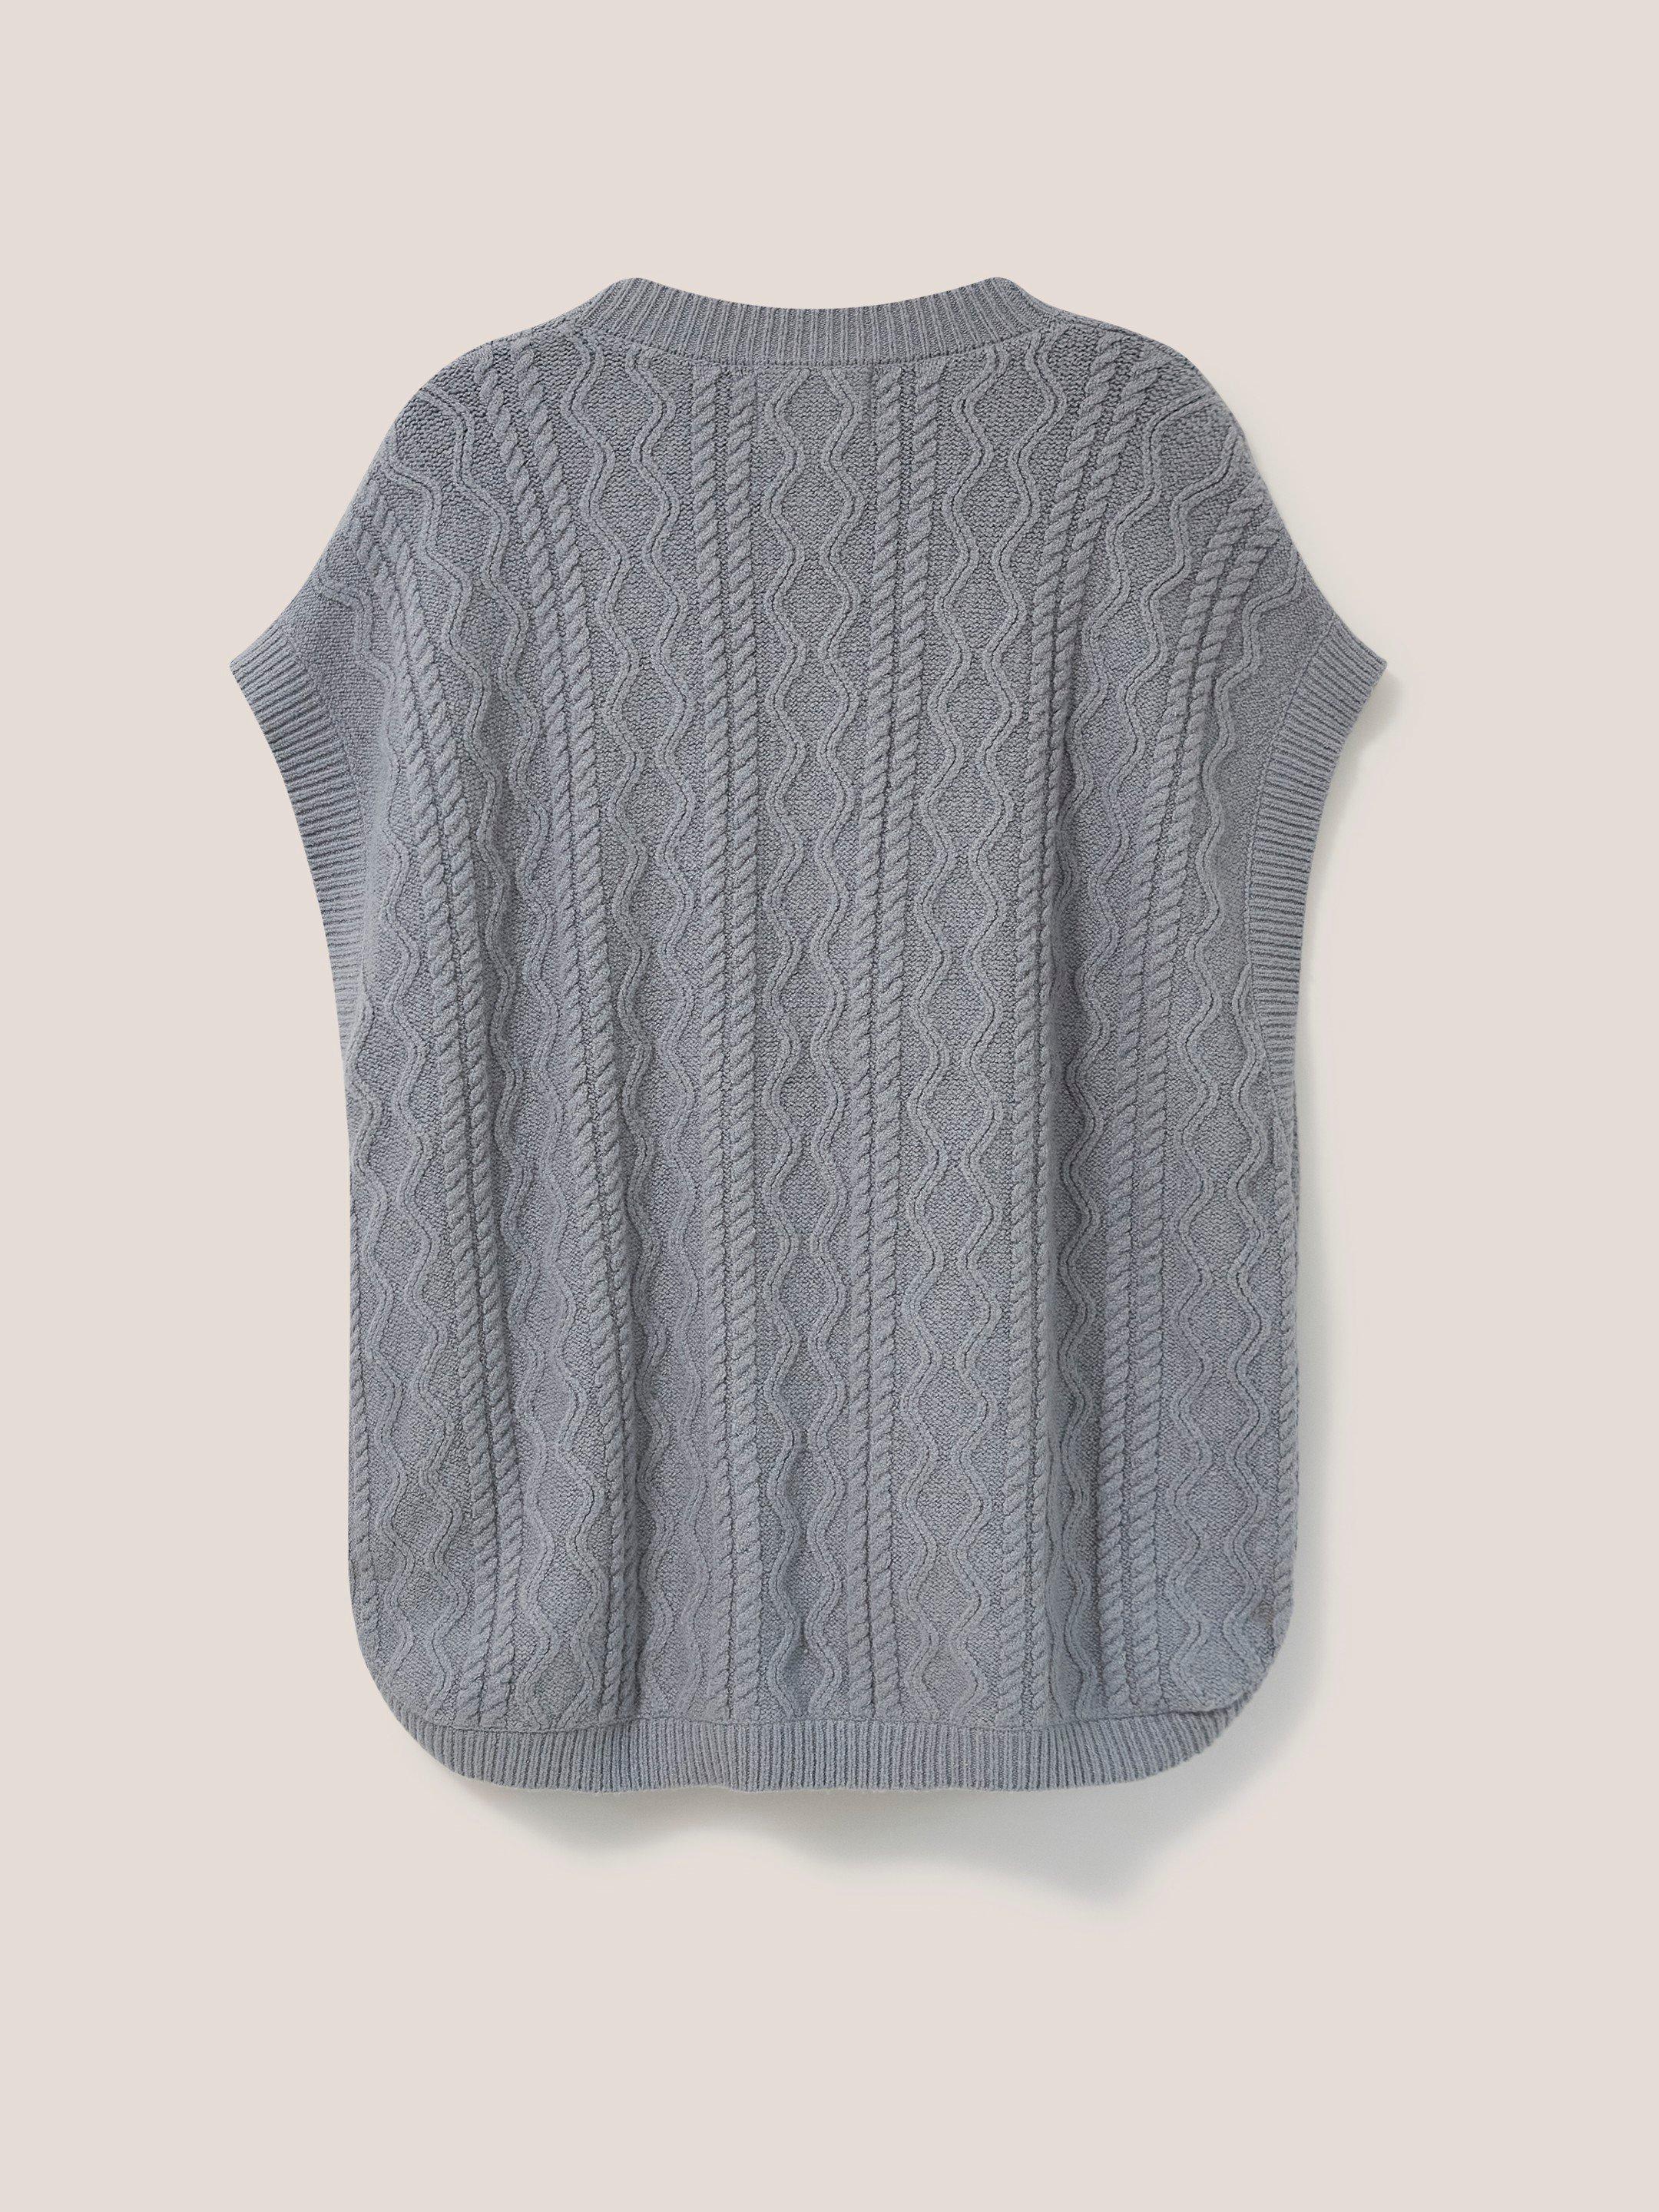 Leia Knitted Throw On in GREY MLT - FLAT BACK